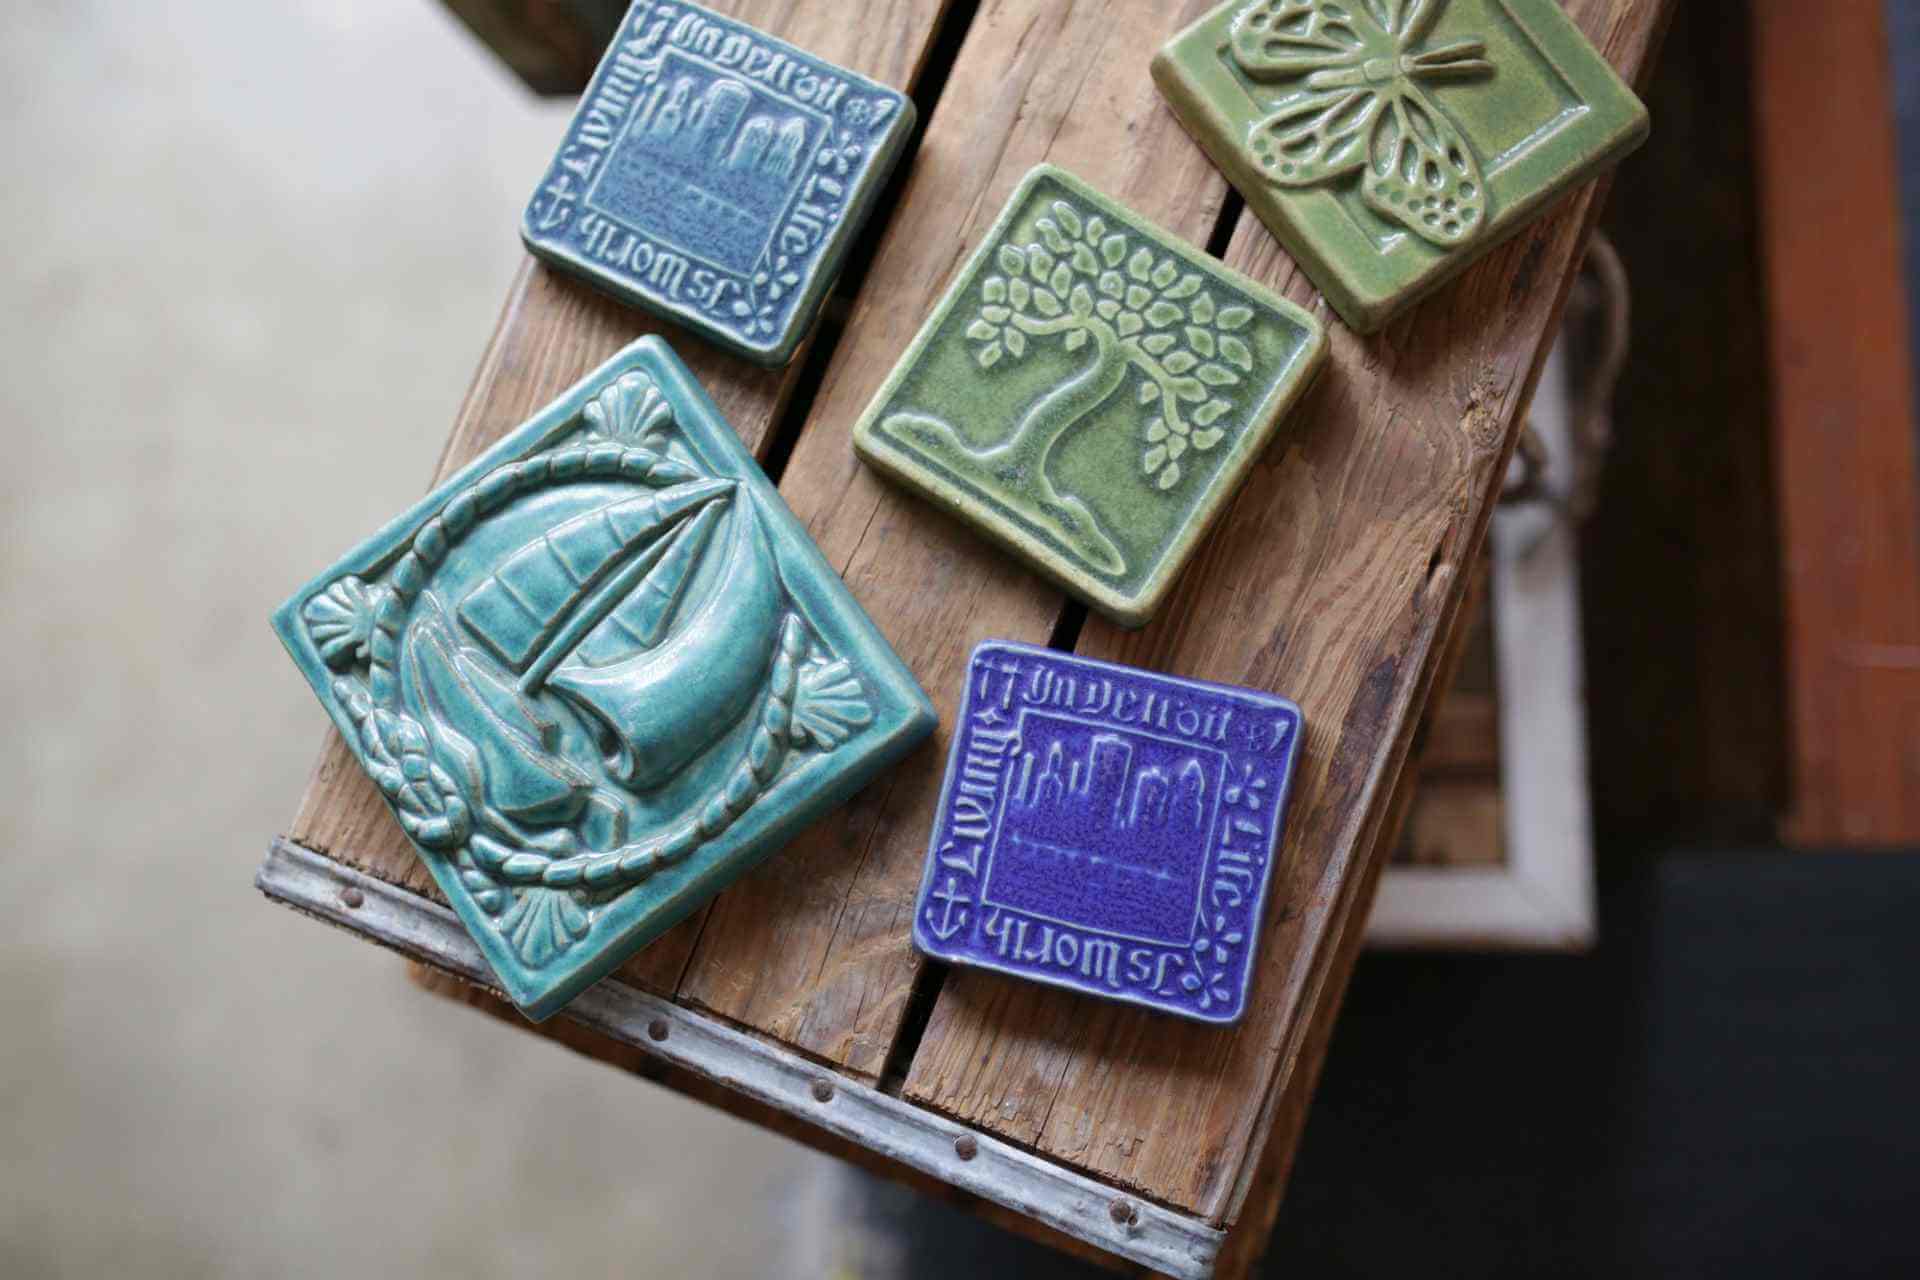 Five Pewabic Pottery tiles on a wood crate